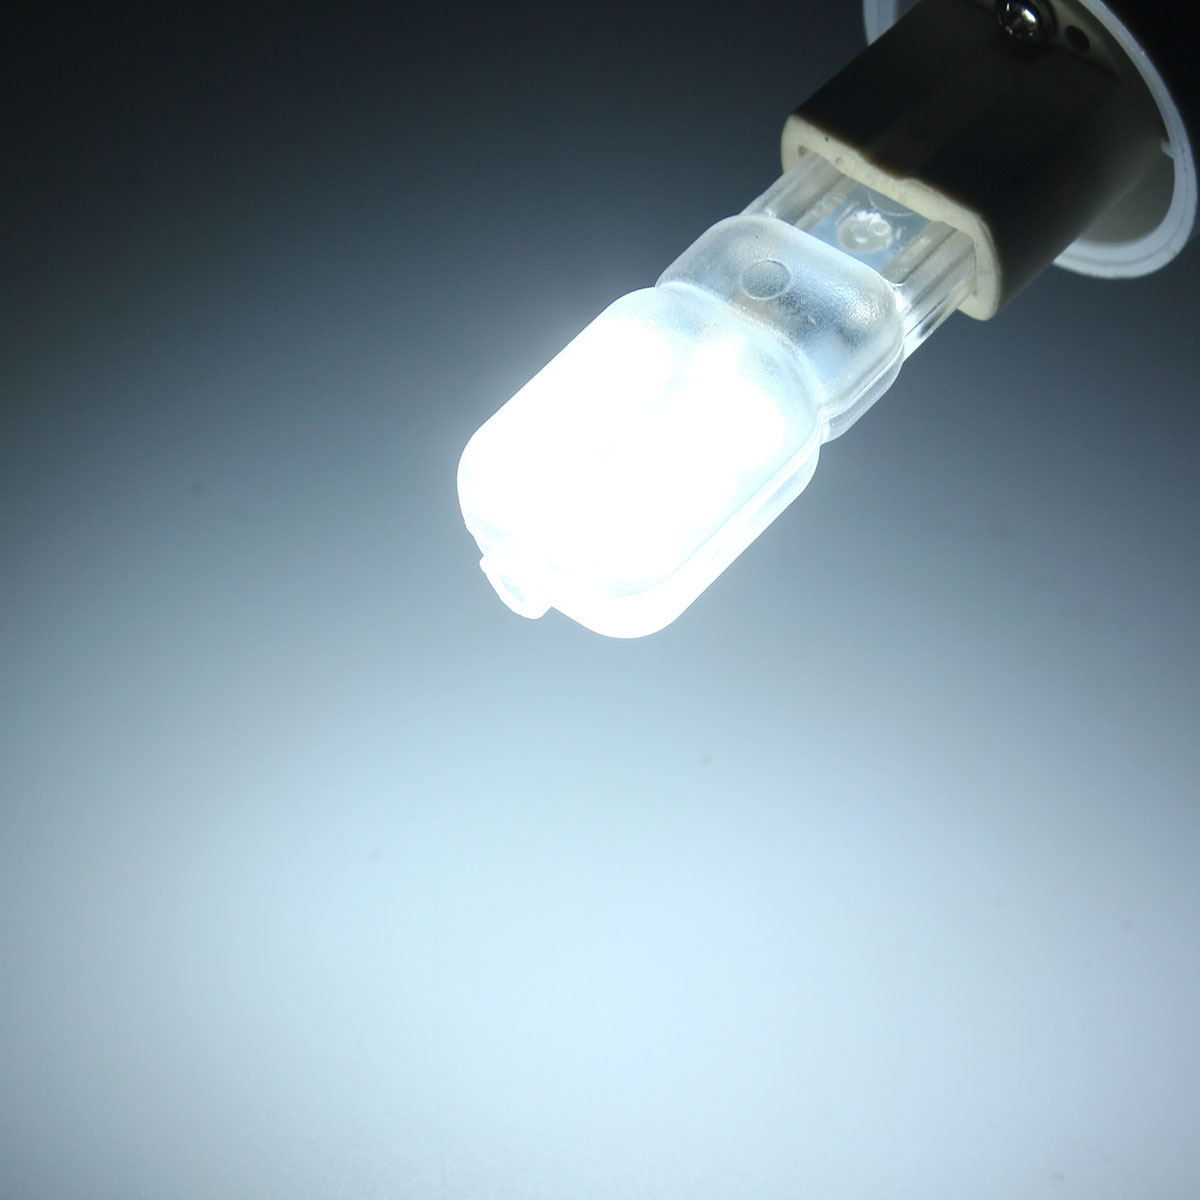 Dimmable-G9-25W-14-SMD-2835-LED-Pure-White-Warm-White-Natural-White-Light-Lamp-Bulb-AC110VAC220V-1073443-2